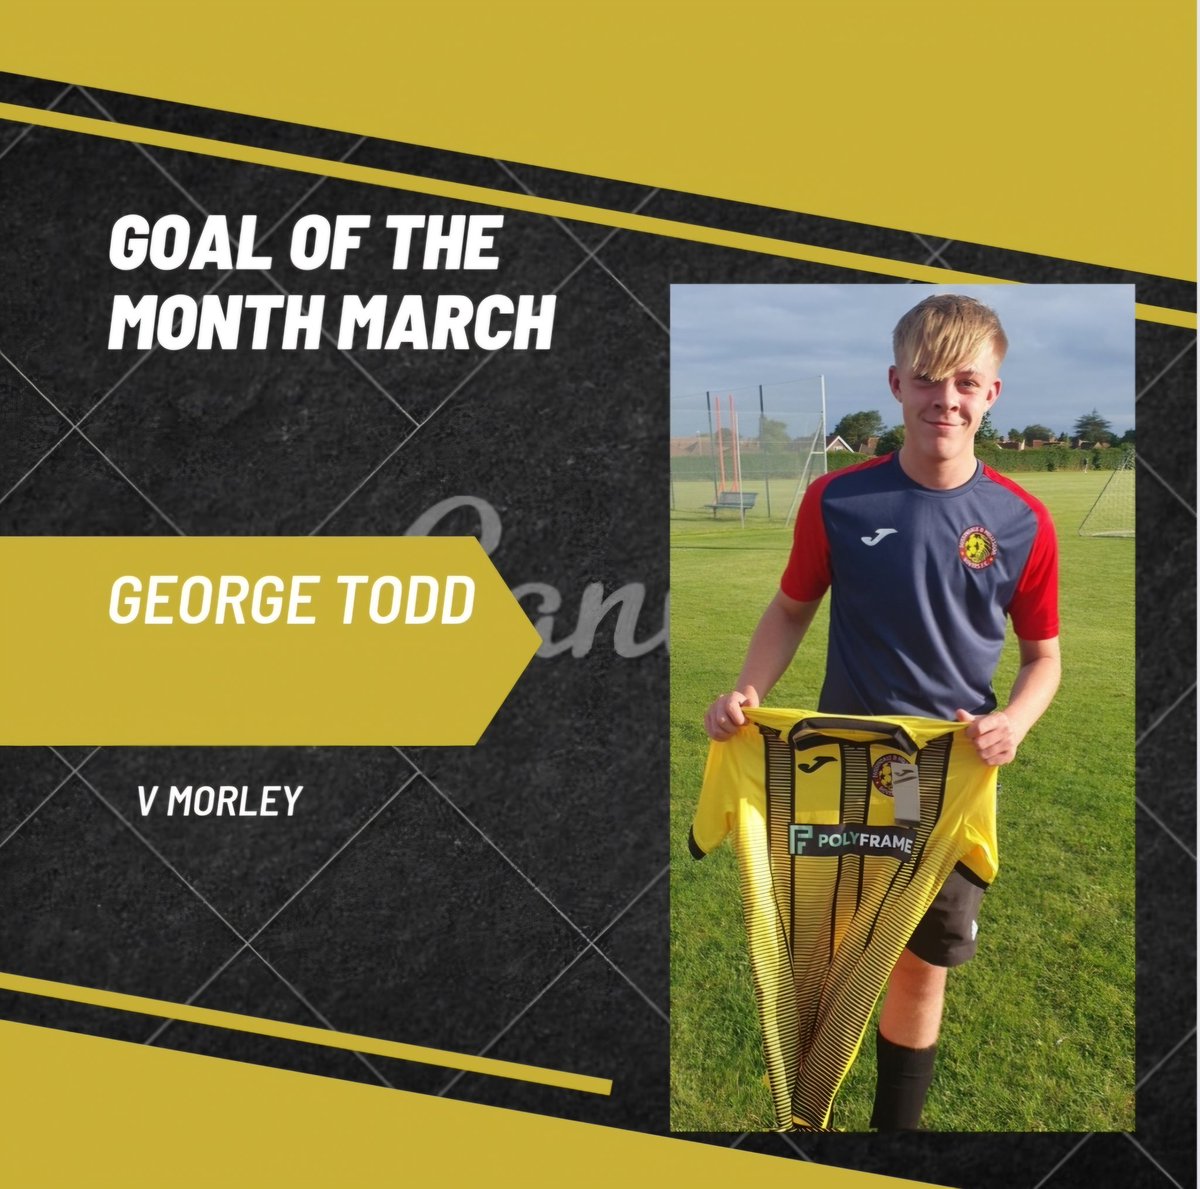 With a superb top corner effort against Morley , goal of the month goes to George 👏 @LeeTodd76